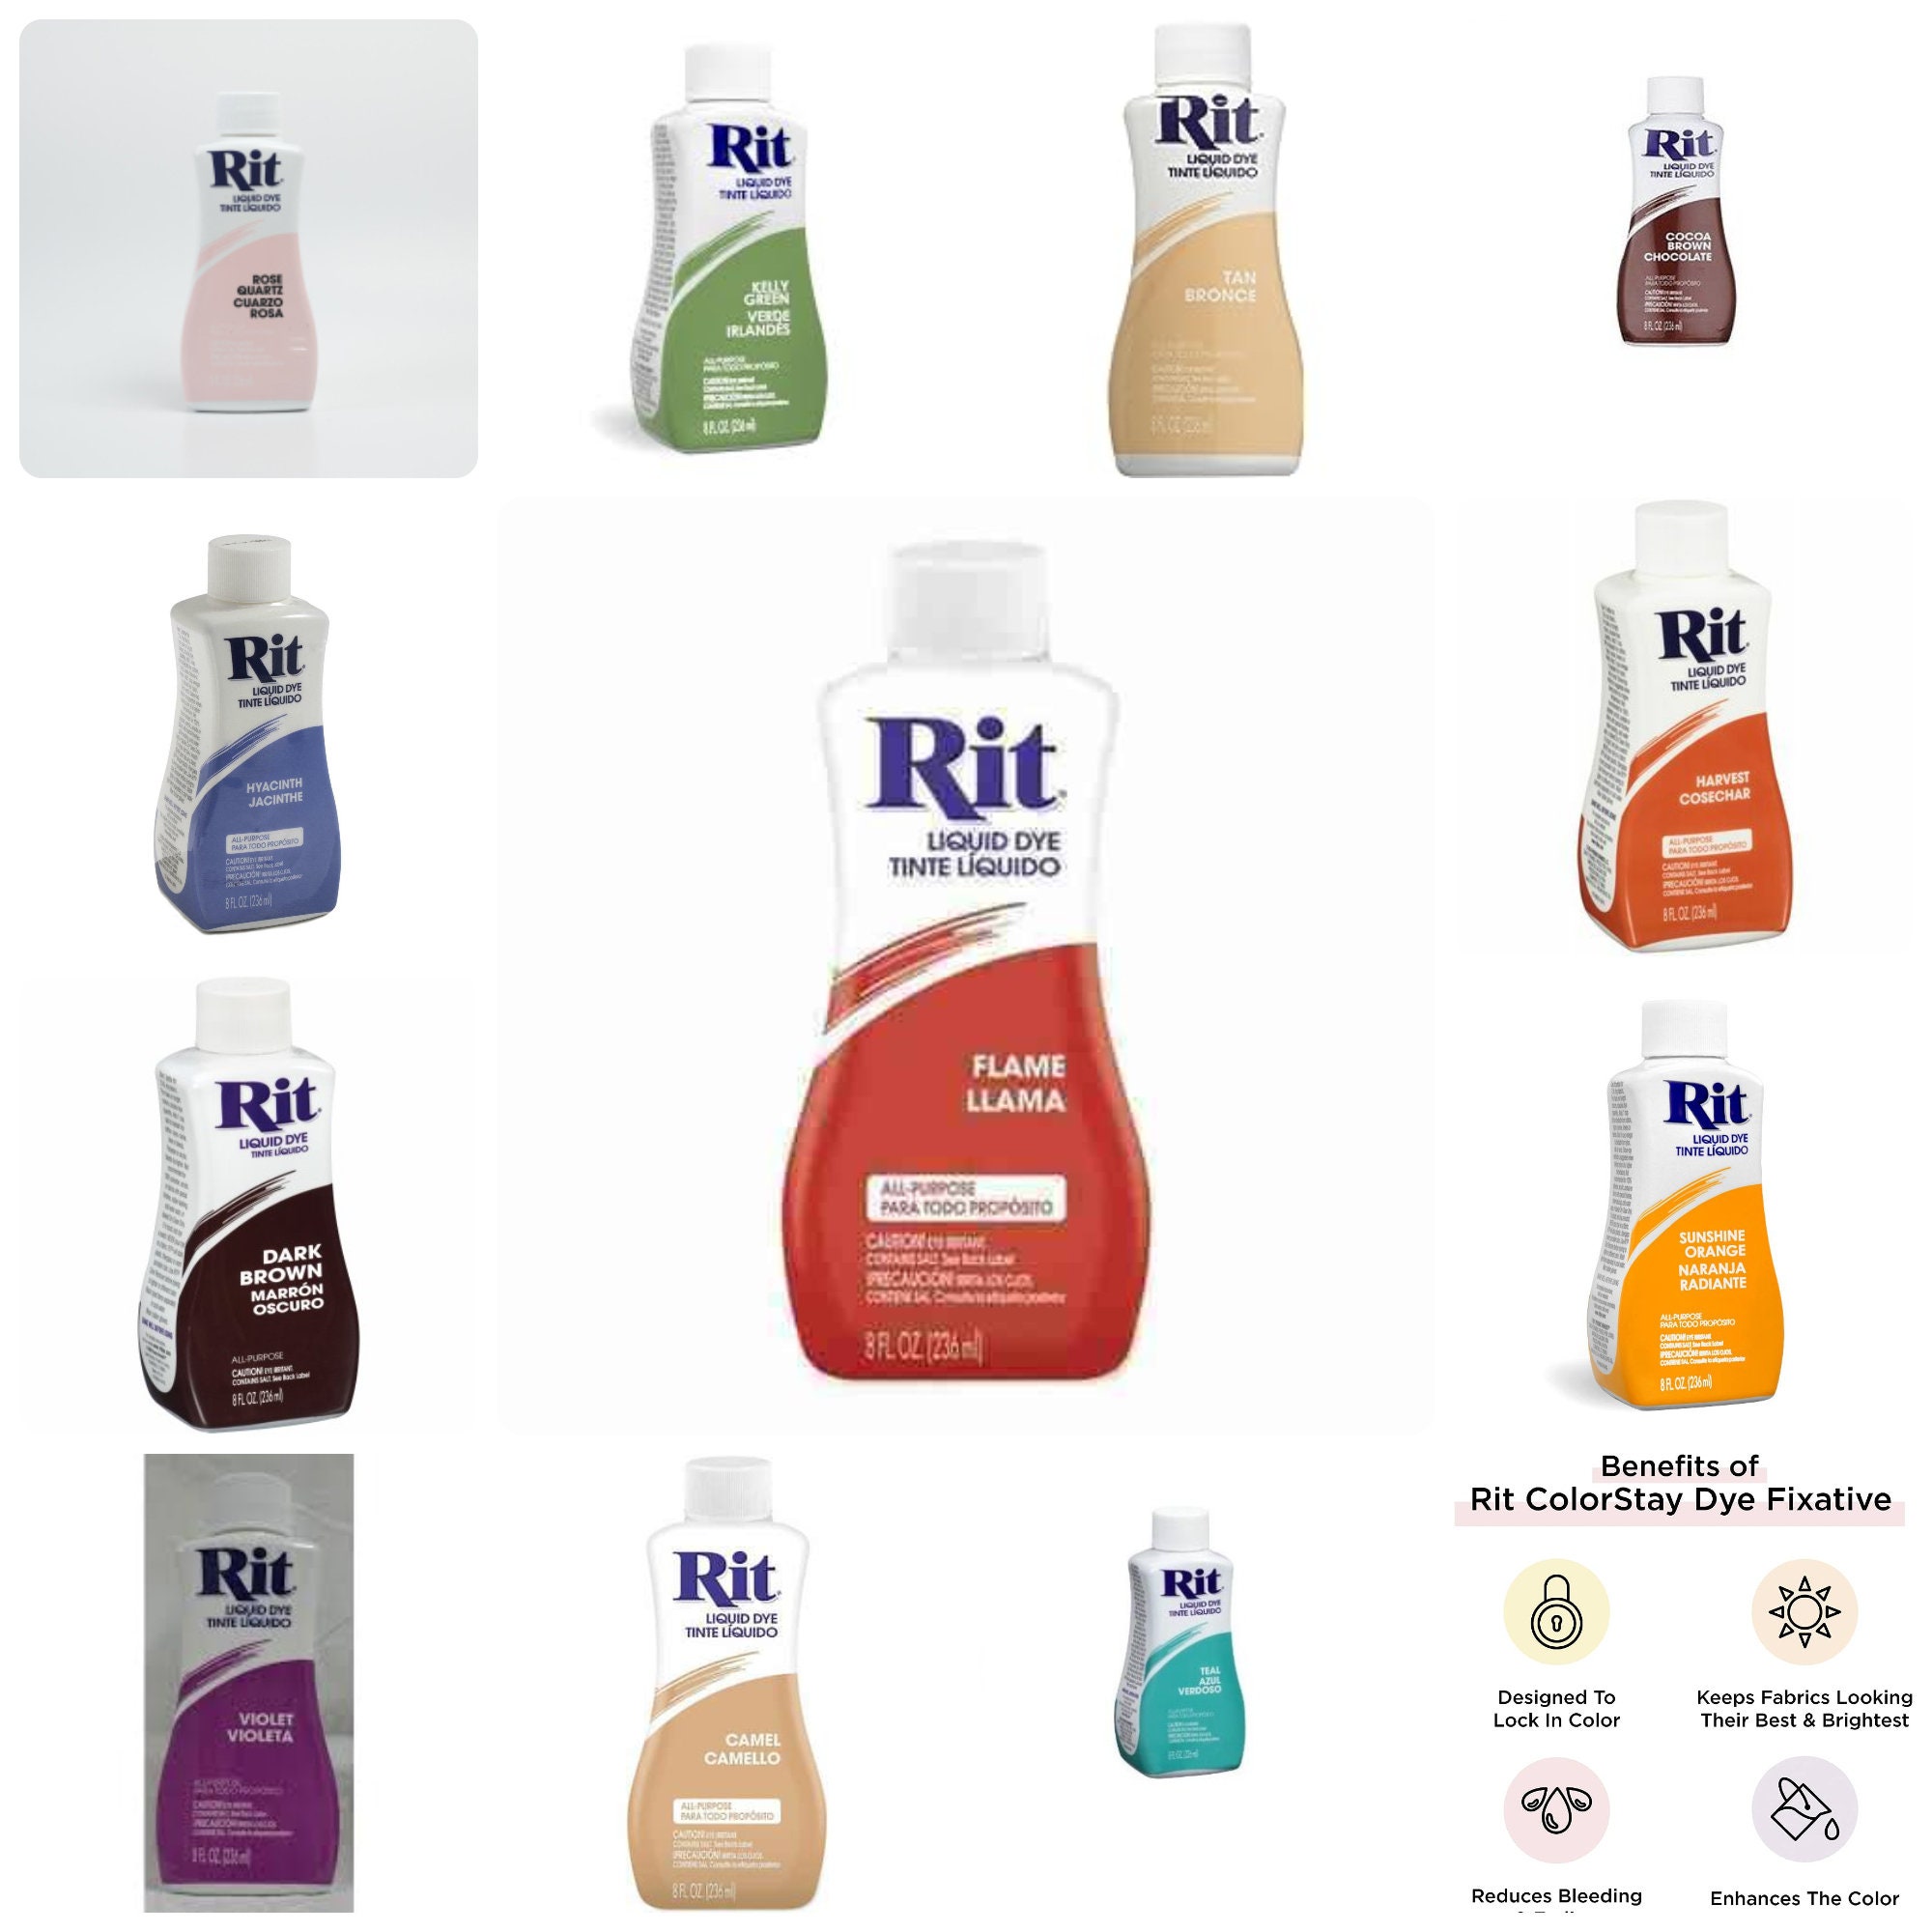 Rit DyeMore Advanced Liquid Dye for Polyester, Acrylic, Acetate